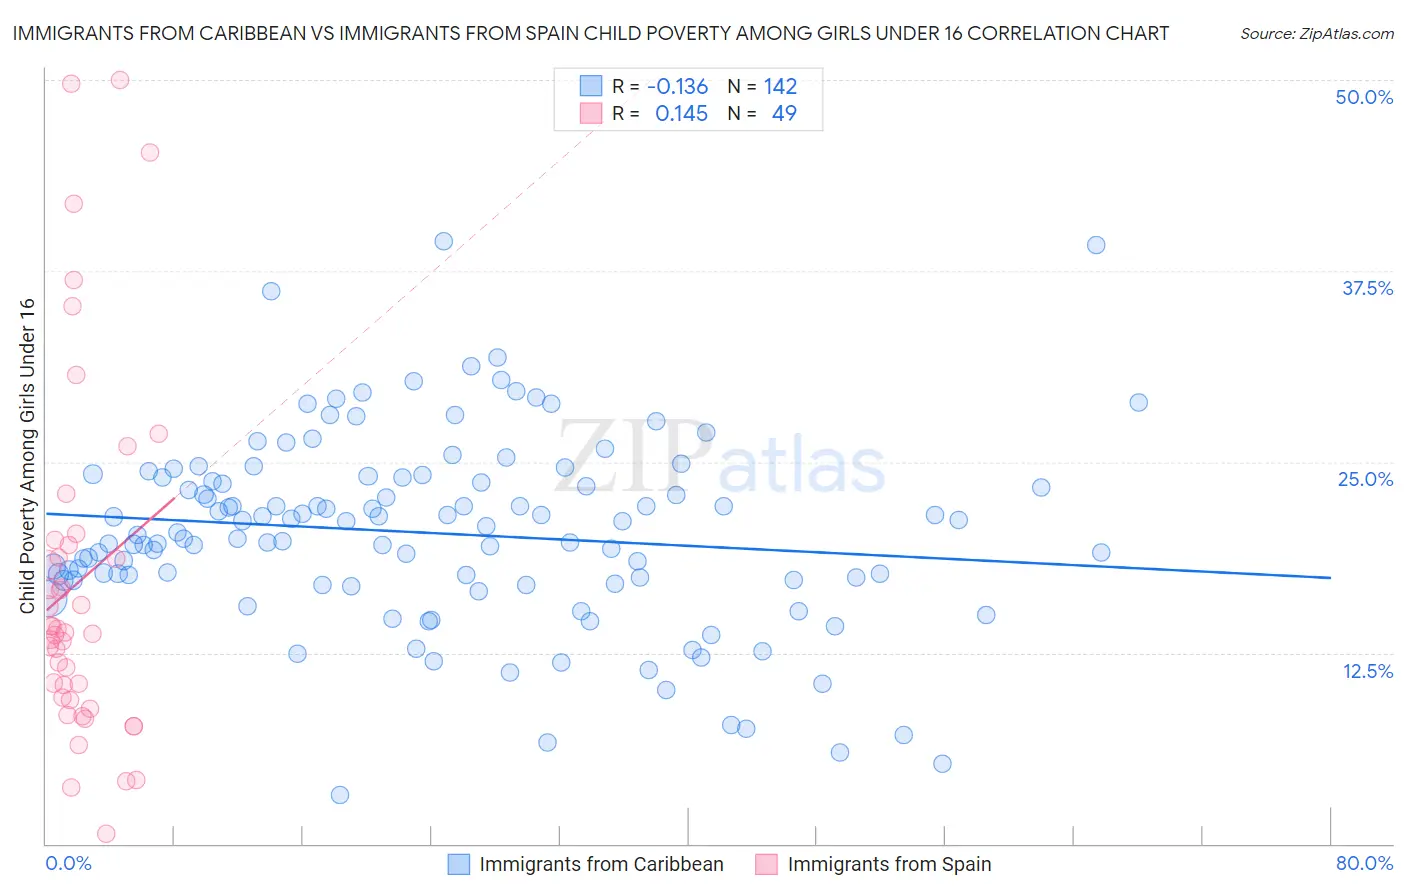 Immigrants from Caribbean vs Immigrants from Spain Child Poverty Among Girls Under 16